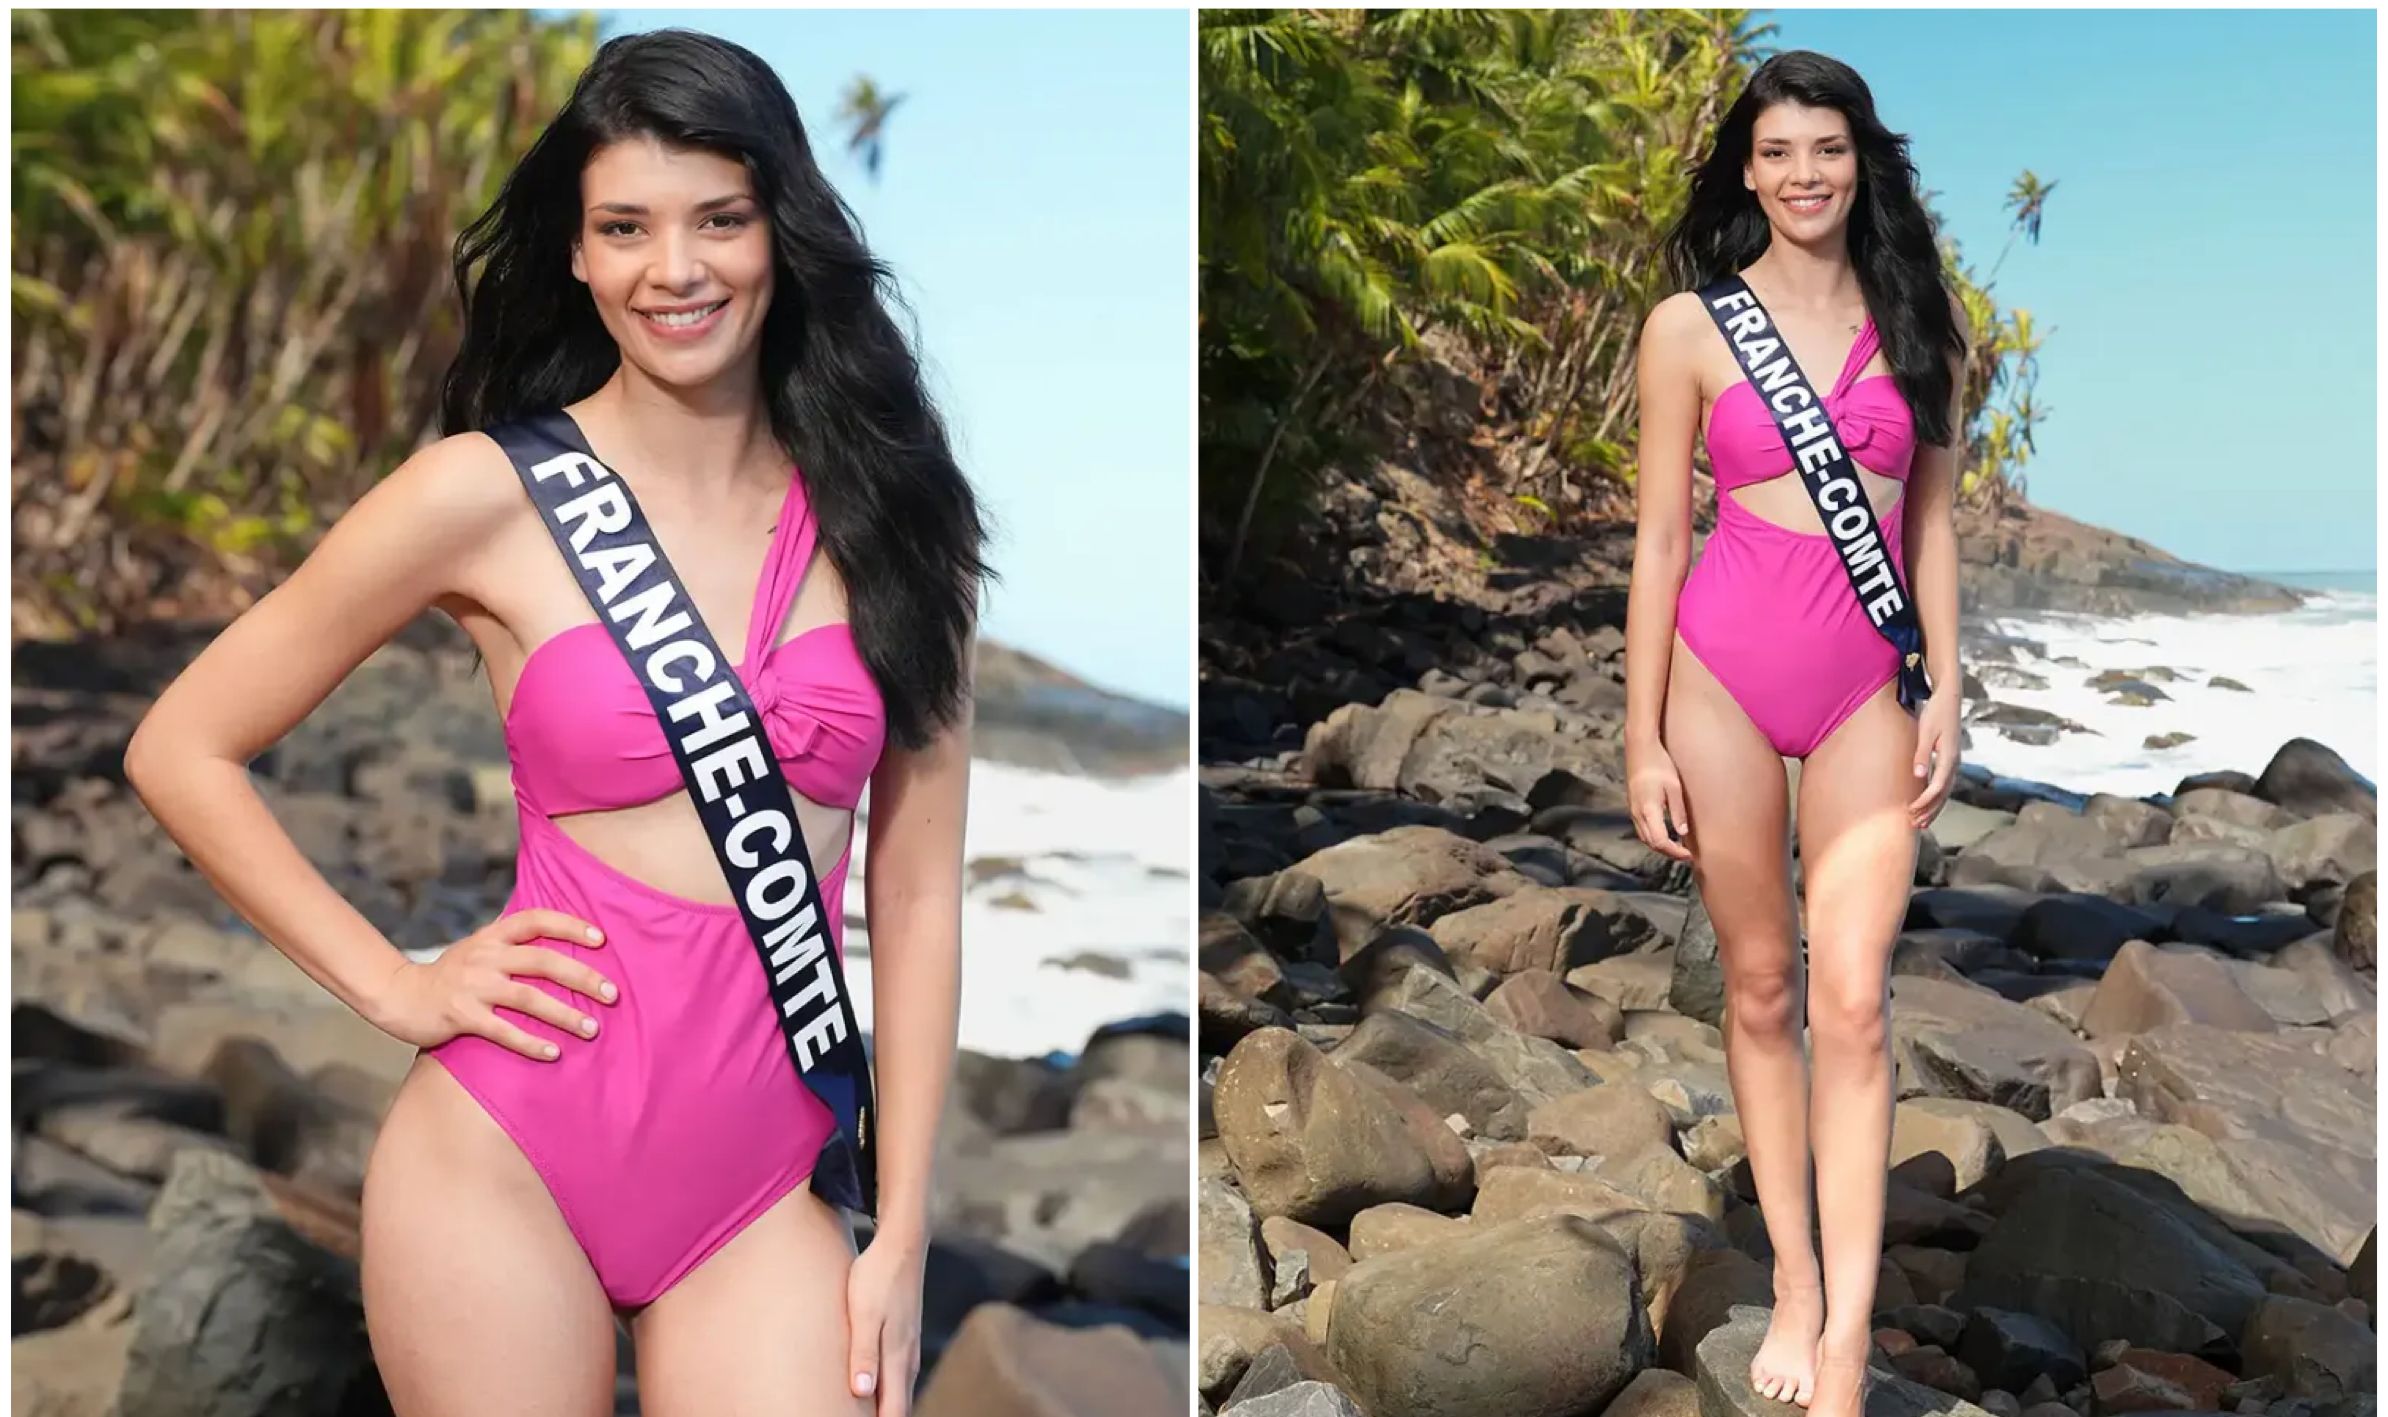 Miss Franche-Comté 2023 - Sonia Coutant